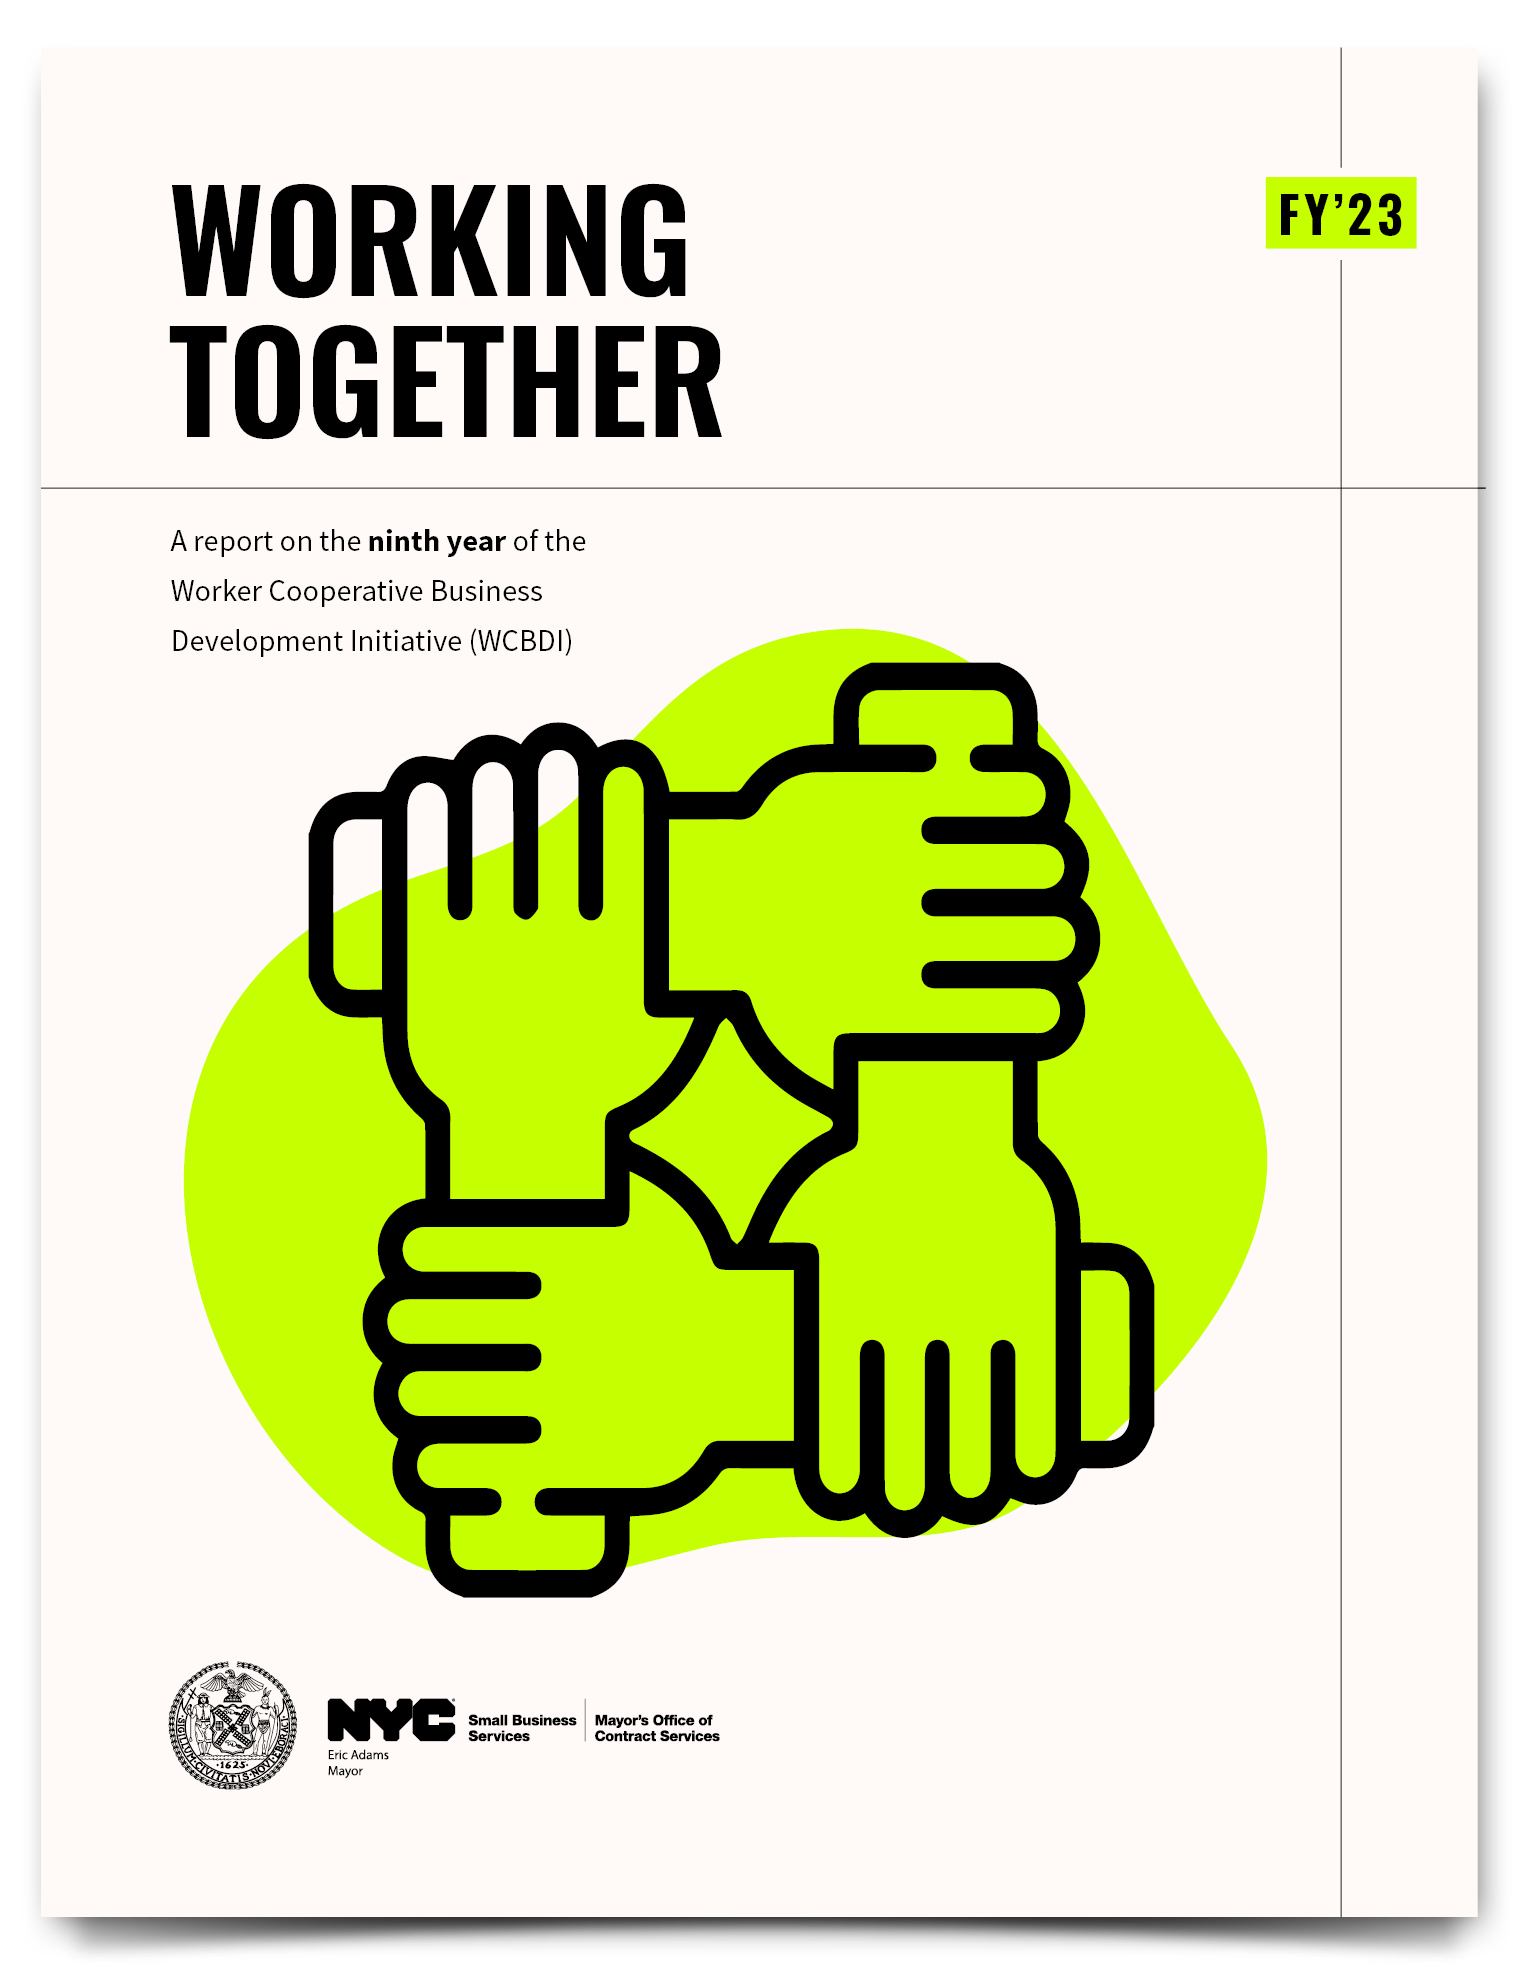 Working Together: A Report on the Ninth Year of the Worker Cooperative Business Development Initiative